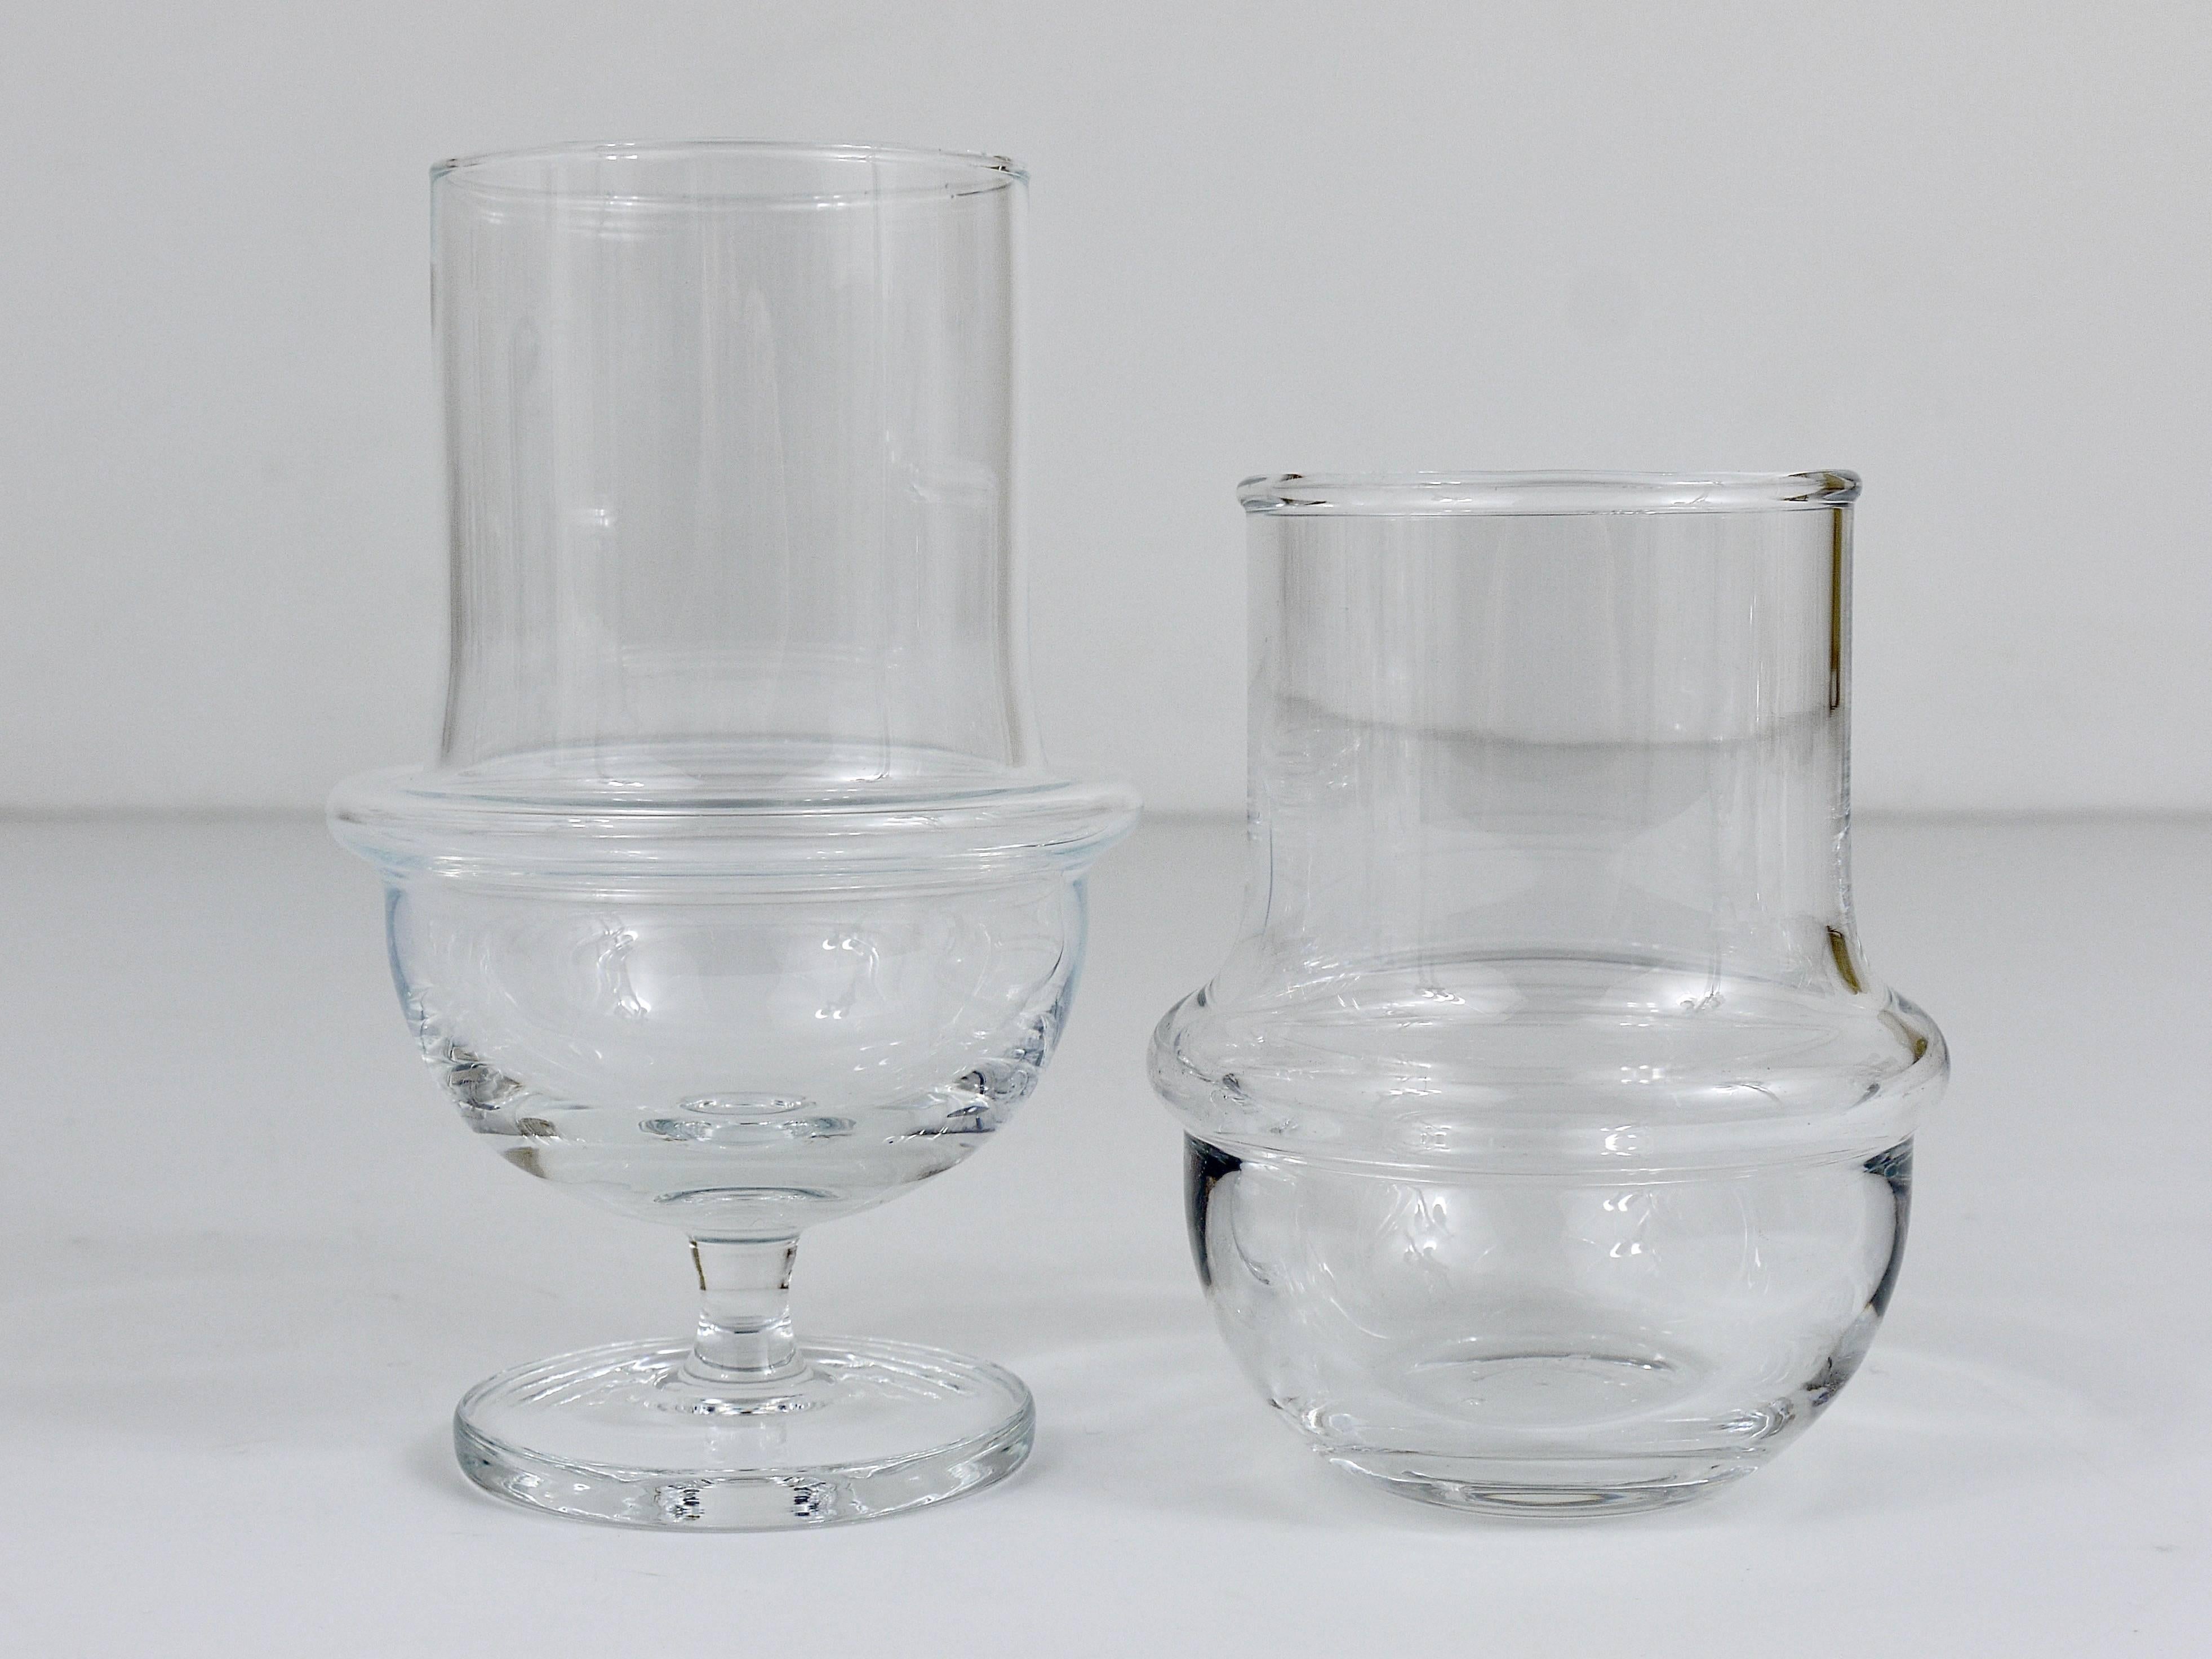 A set of six juice & water glasses designed by Carl Aubock, executed by Ostovics Culinar, Austria, 1970s. Very beautiful, unusual and rare glasses in excellent condition. We offer a matching set of six wine glasses with stems in our other listings.